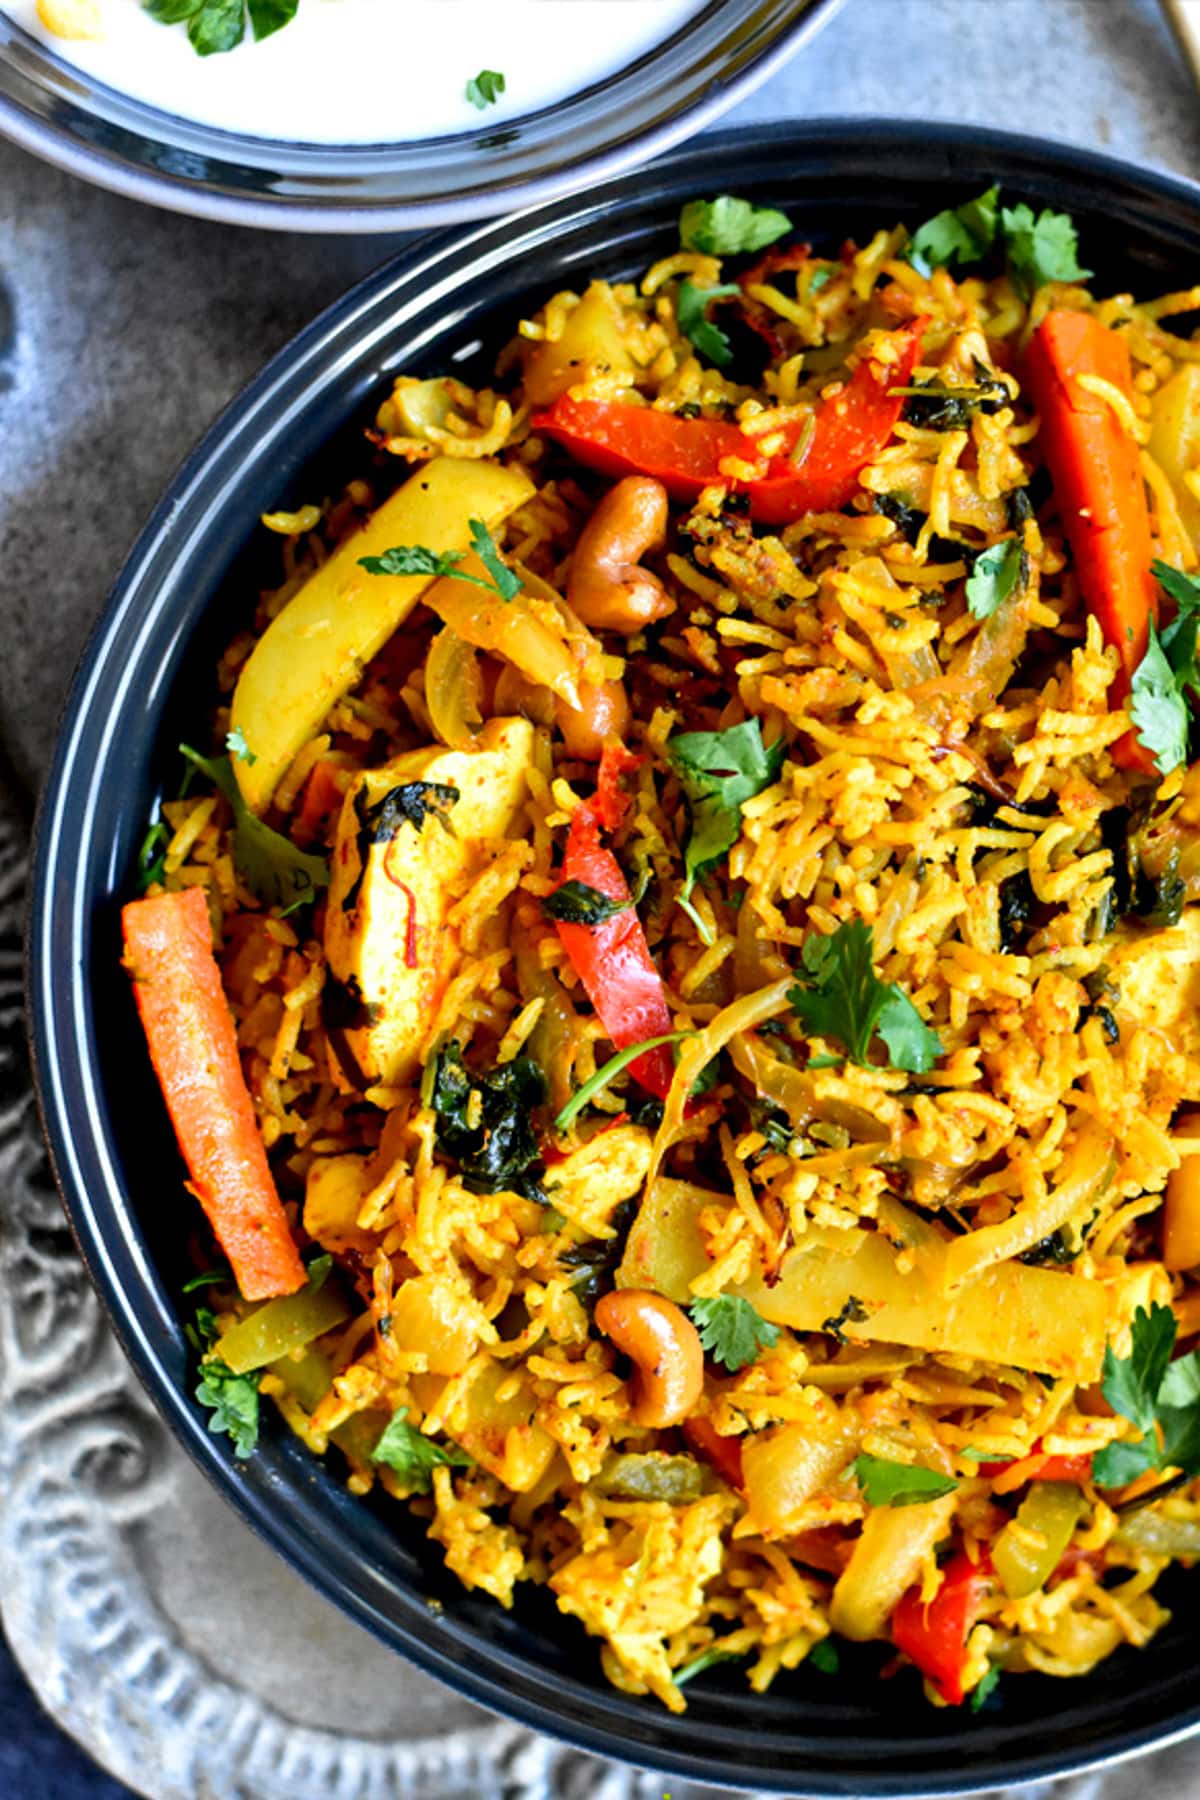 Indian spiced rice and vegetables served in a blue bowl